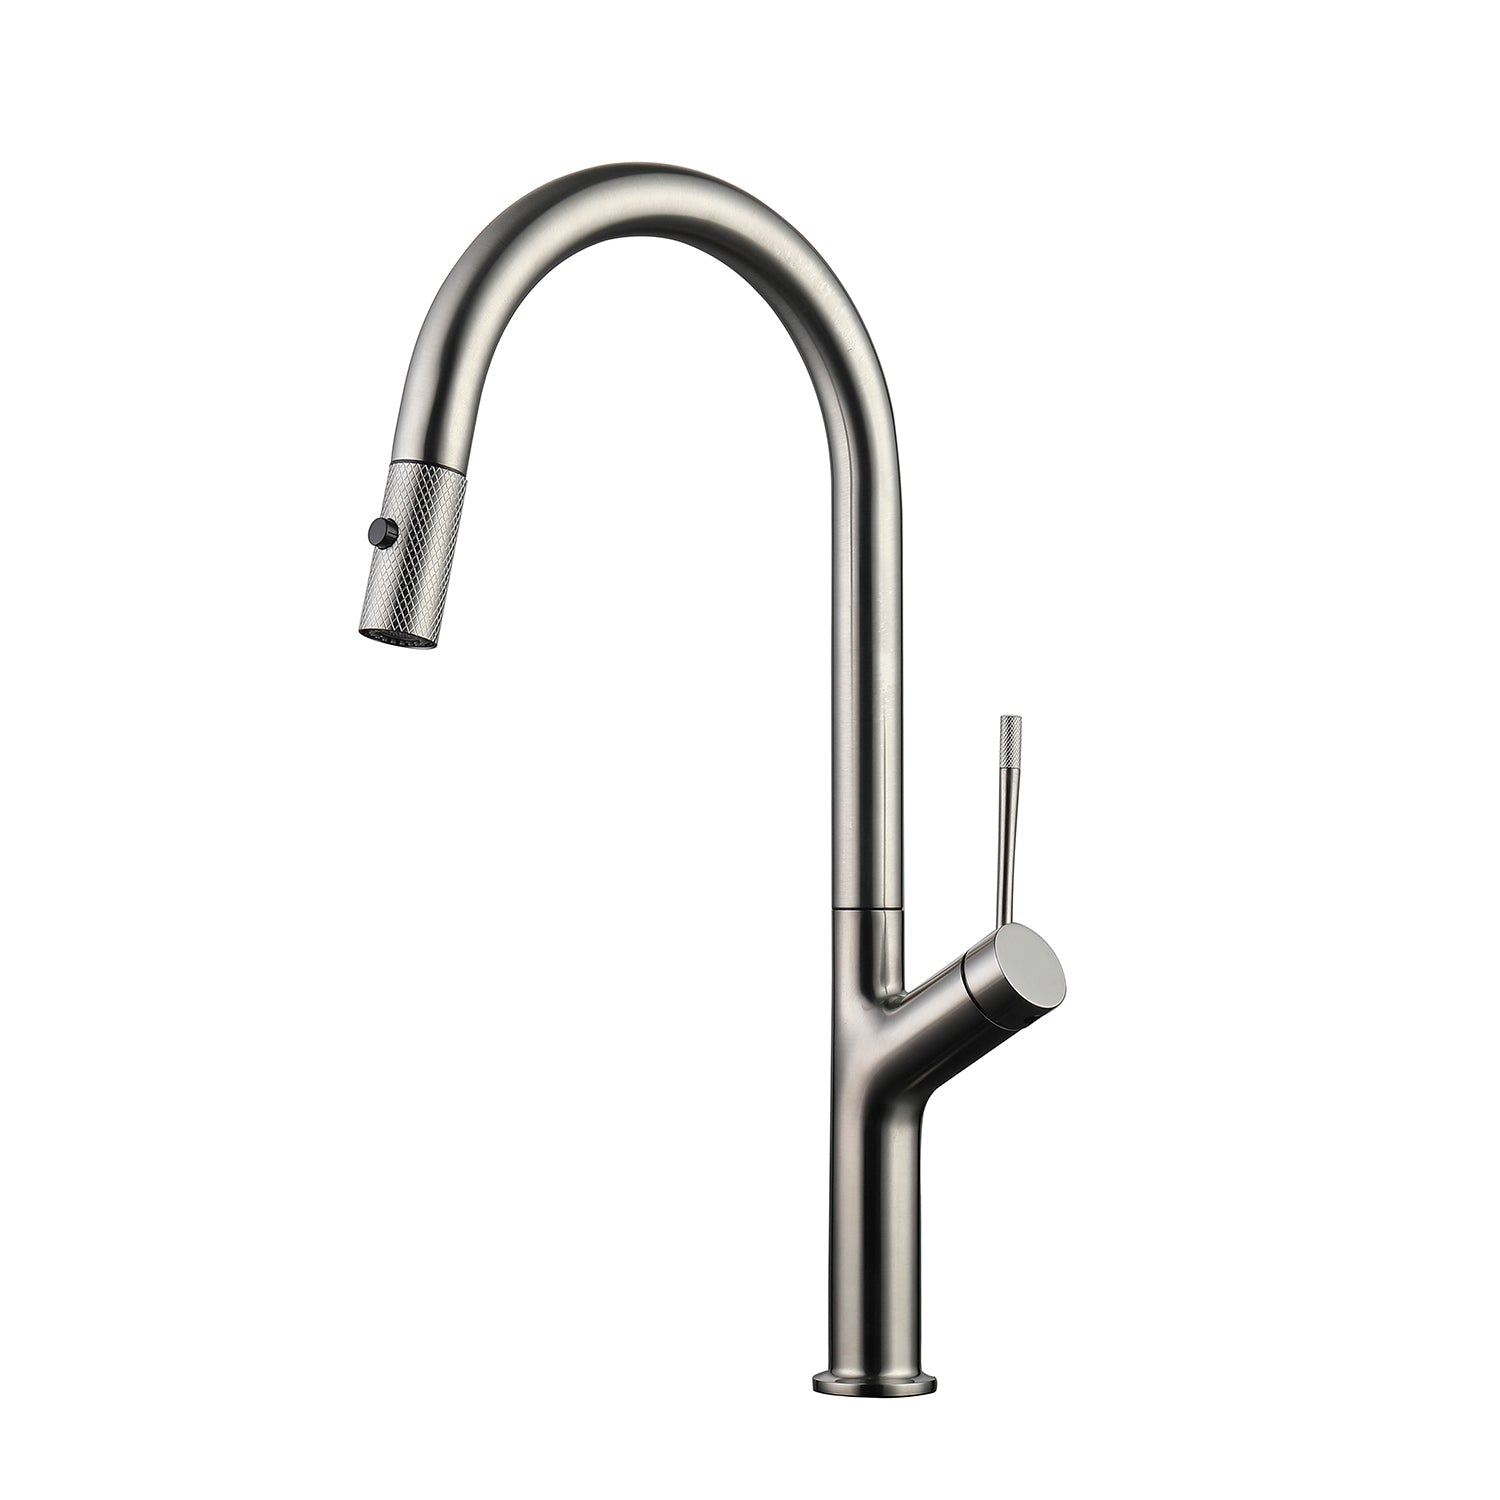 DAX Single Handle Pull Out Kitchen Faucet (DAX-8020011)